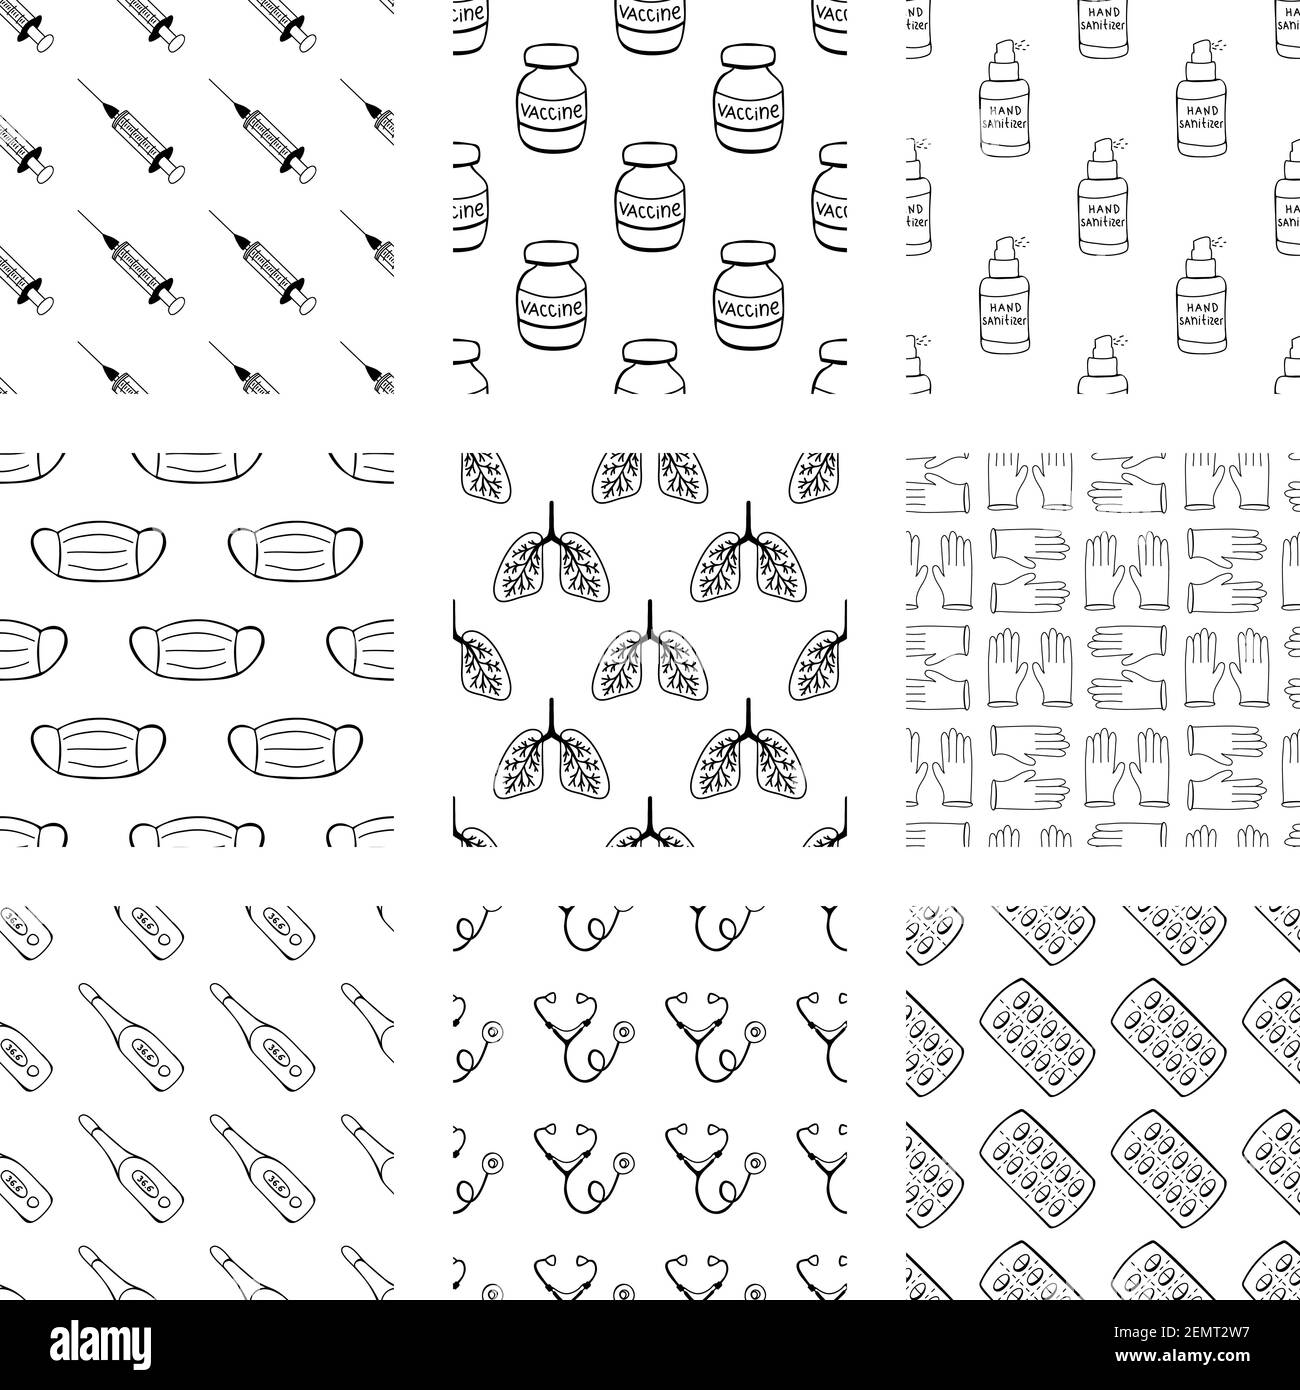 Medical set of seamless patterns from handdrawn doodle elements. Stock Vector